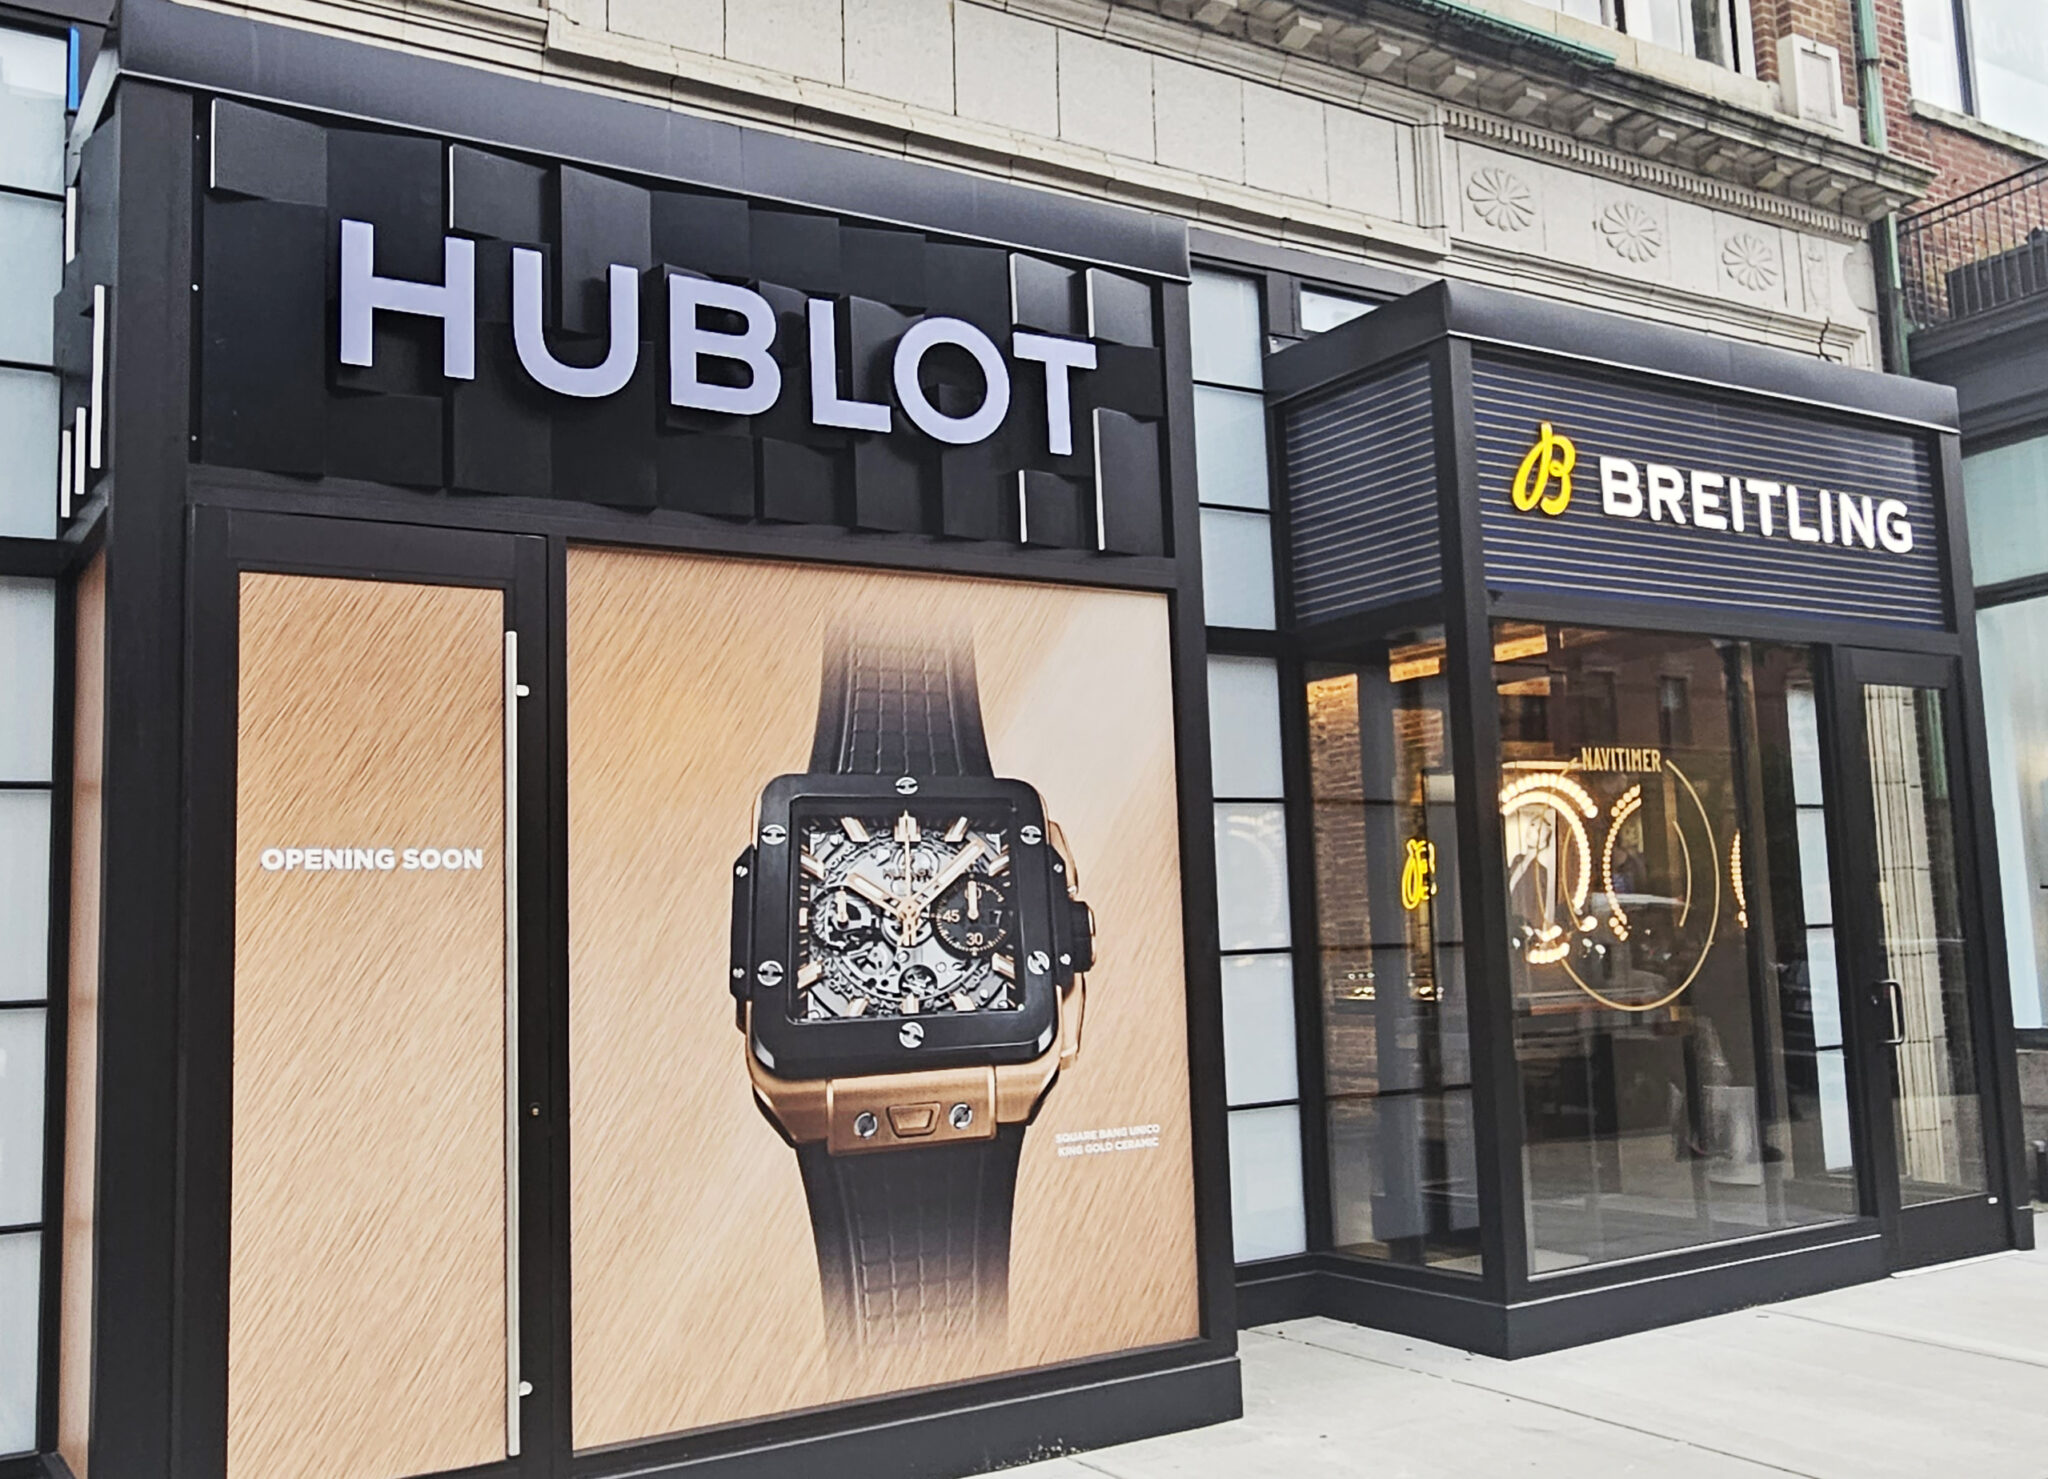 Hublot and breitling